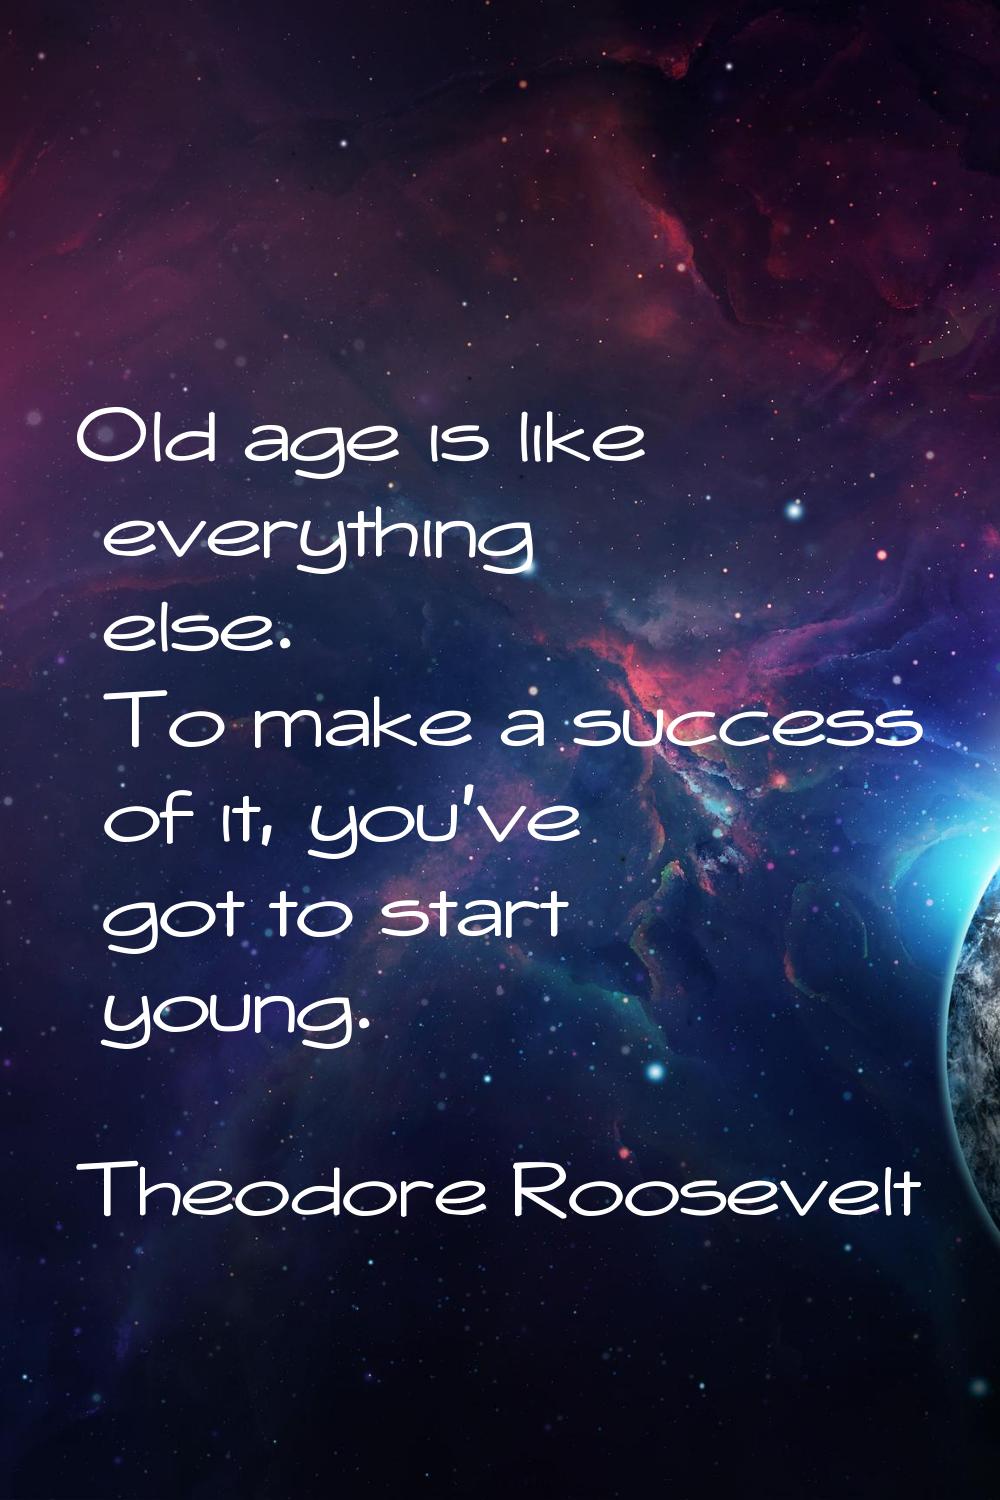 Old age is like everything else. To make a success of it, you've got to start young.